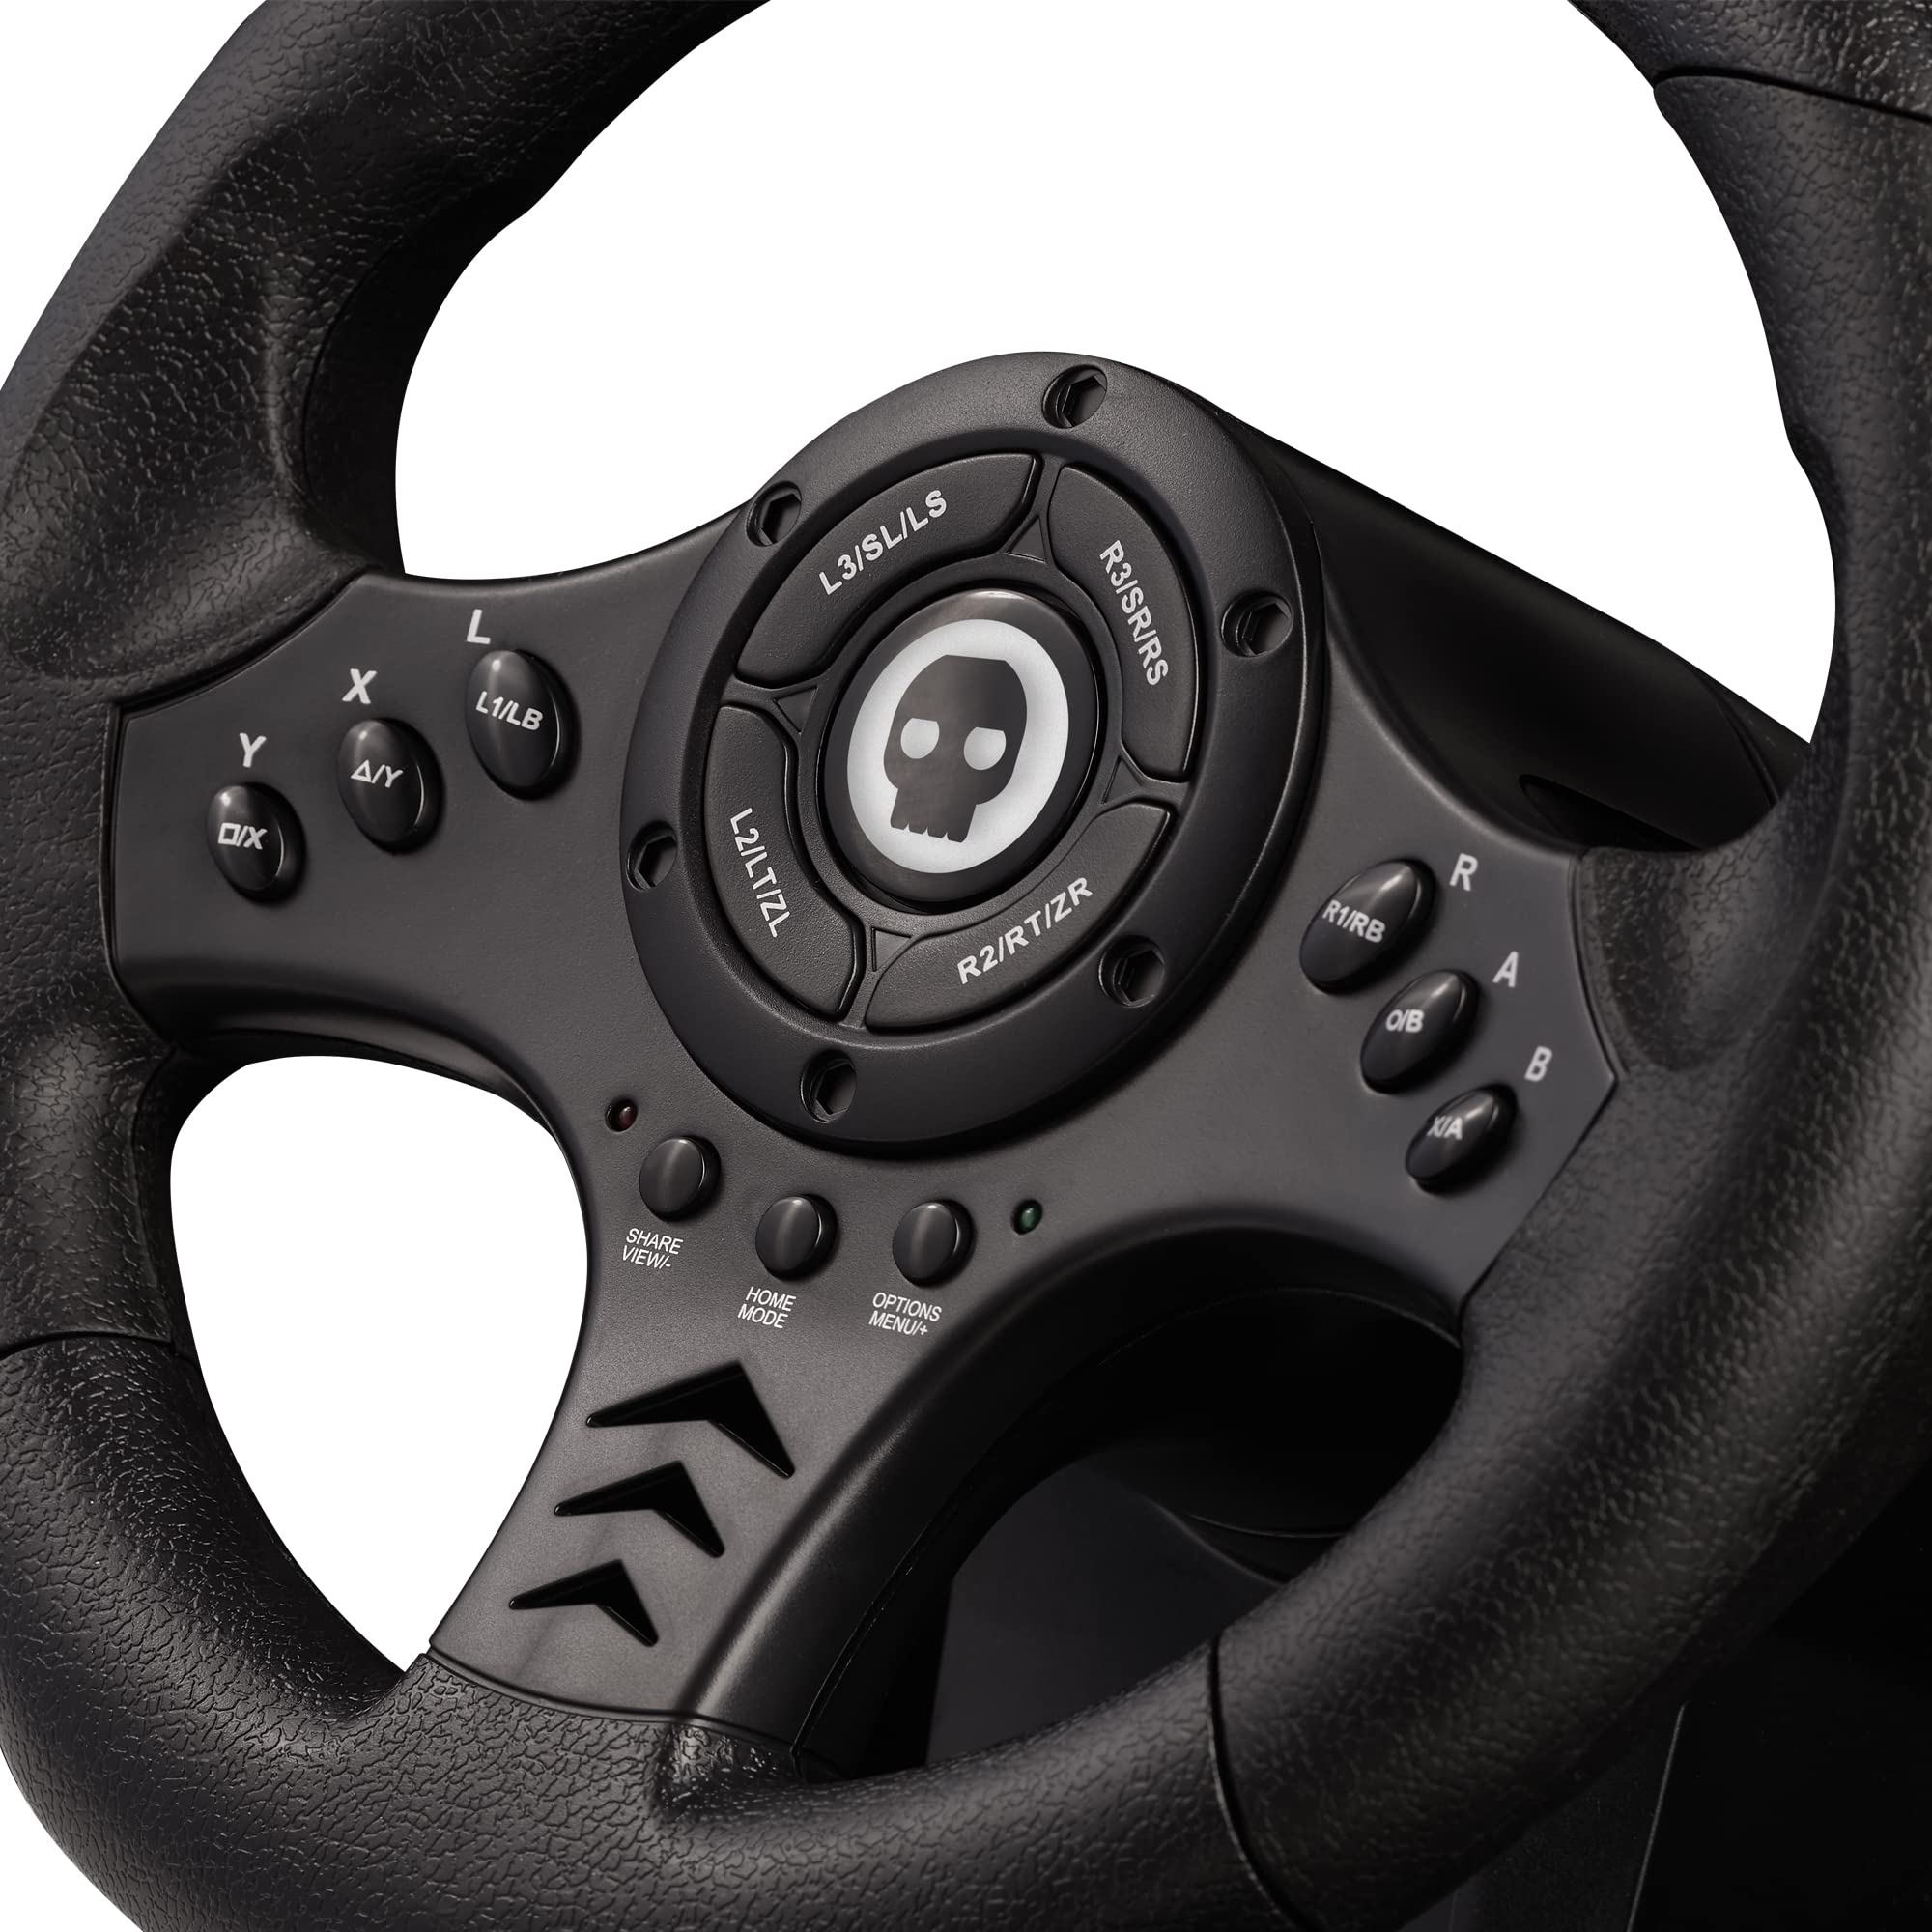 Numskull Next-Gen Multi Format Racing Wheel 2022 with Pedals - Compatible with Xbox Series X|S, Xbox One, PS4, Nintendo Switch and PC - Realistic Steering Wheel Controller Accessory